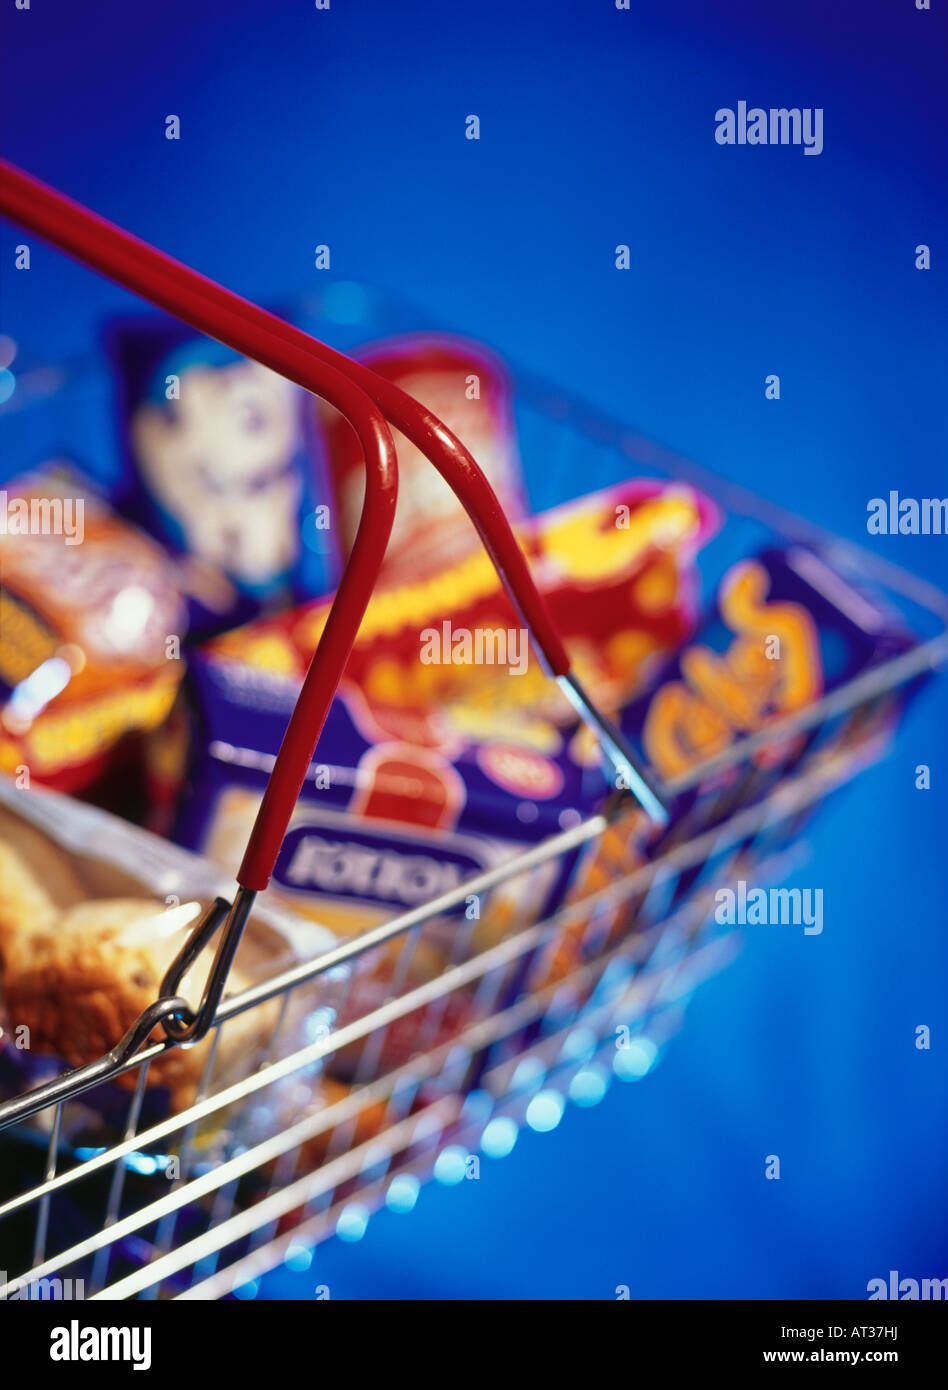 A shopping basket containing unhealthy food Stock Photo